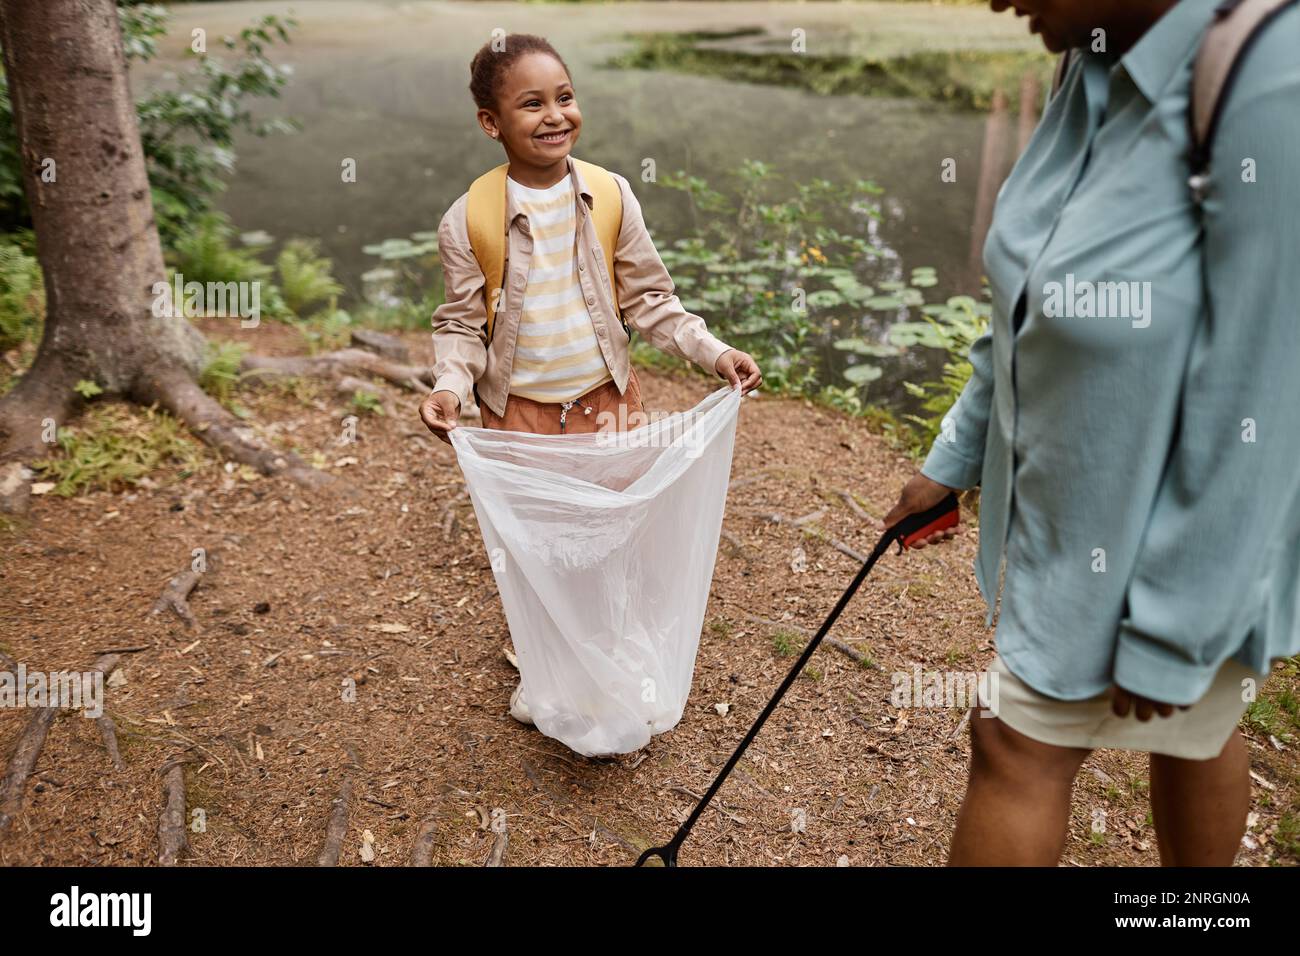 High angle portrait of smiling black girl holding trash bag outdoors and helping clean nature with mom Stock Photo